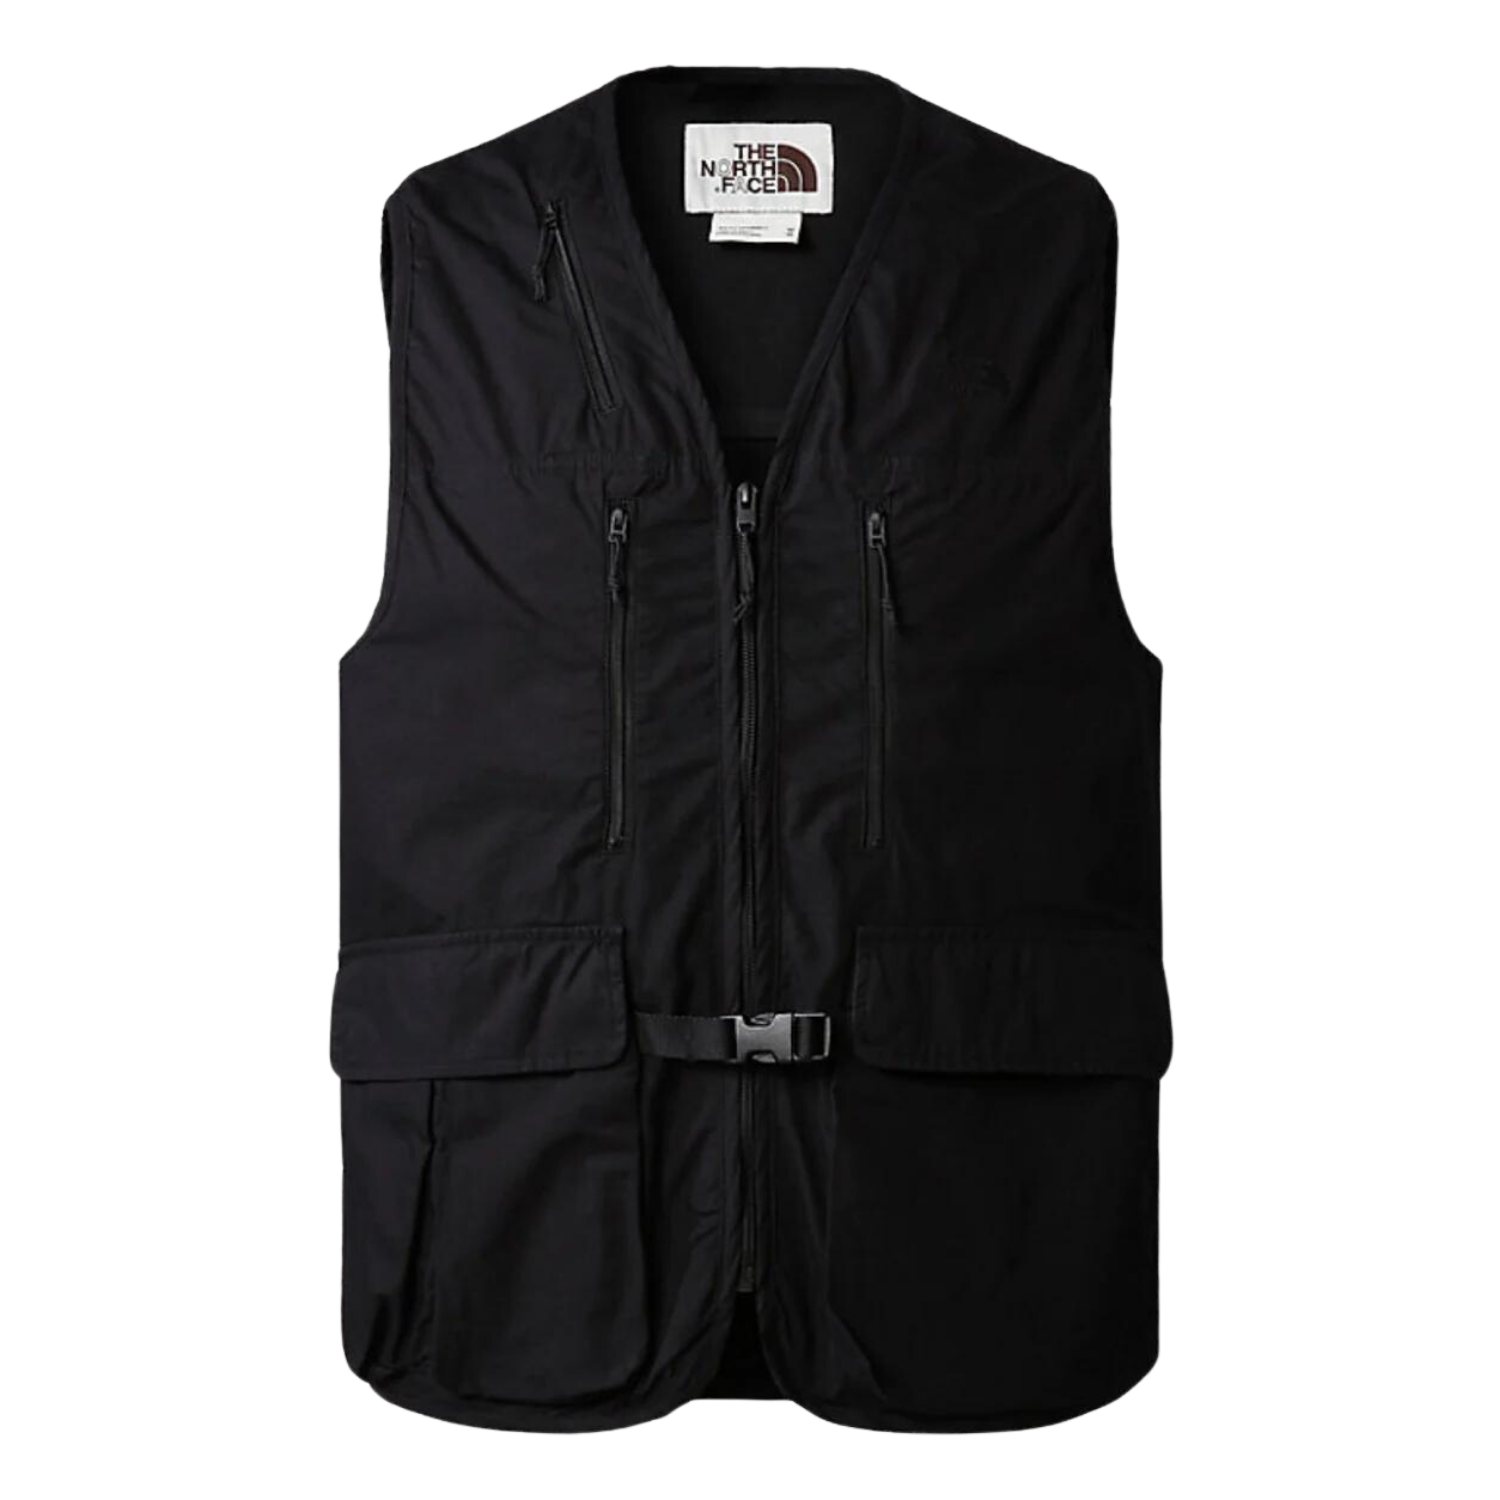 M M66 UTILITY GILLET - BLACK I THE NORTH FACE - Momentum Clothing